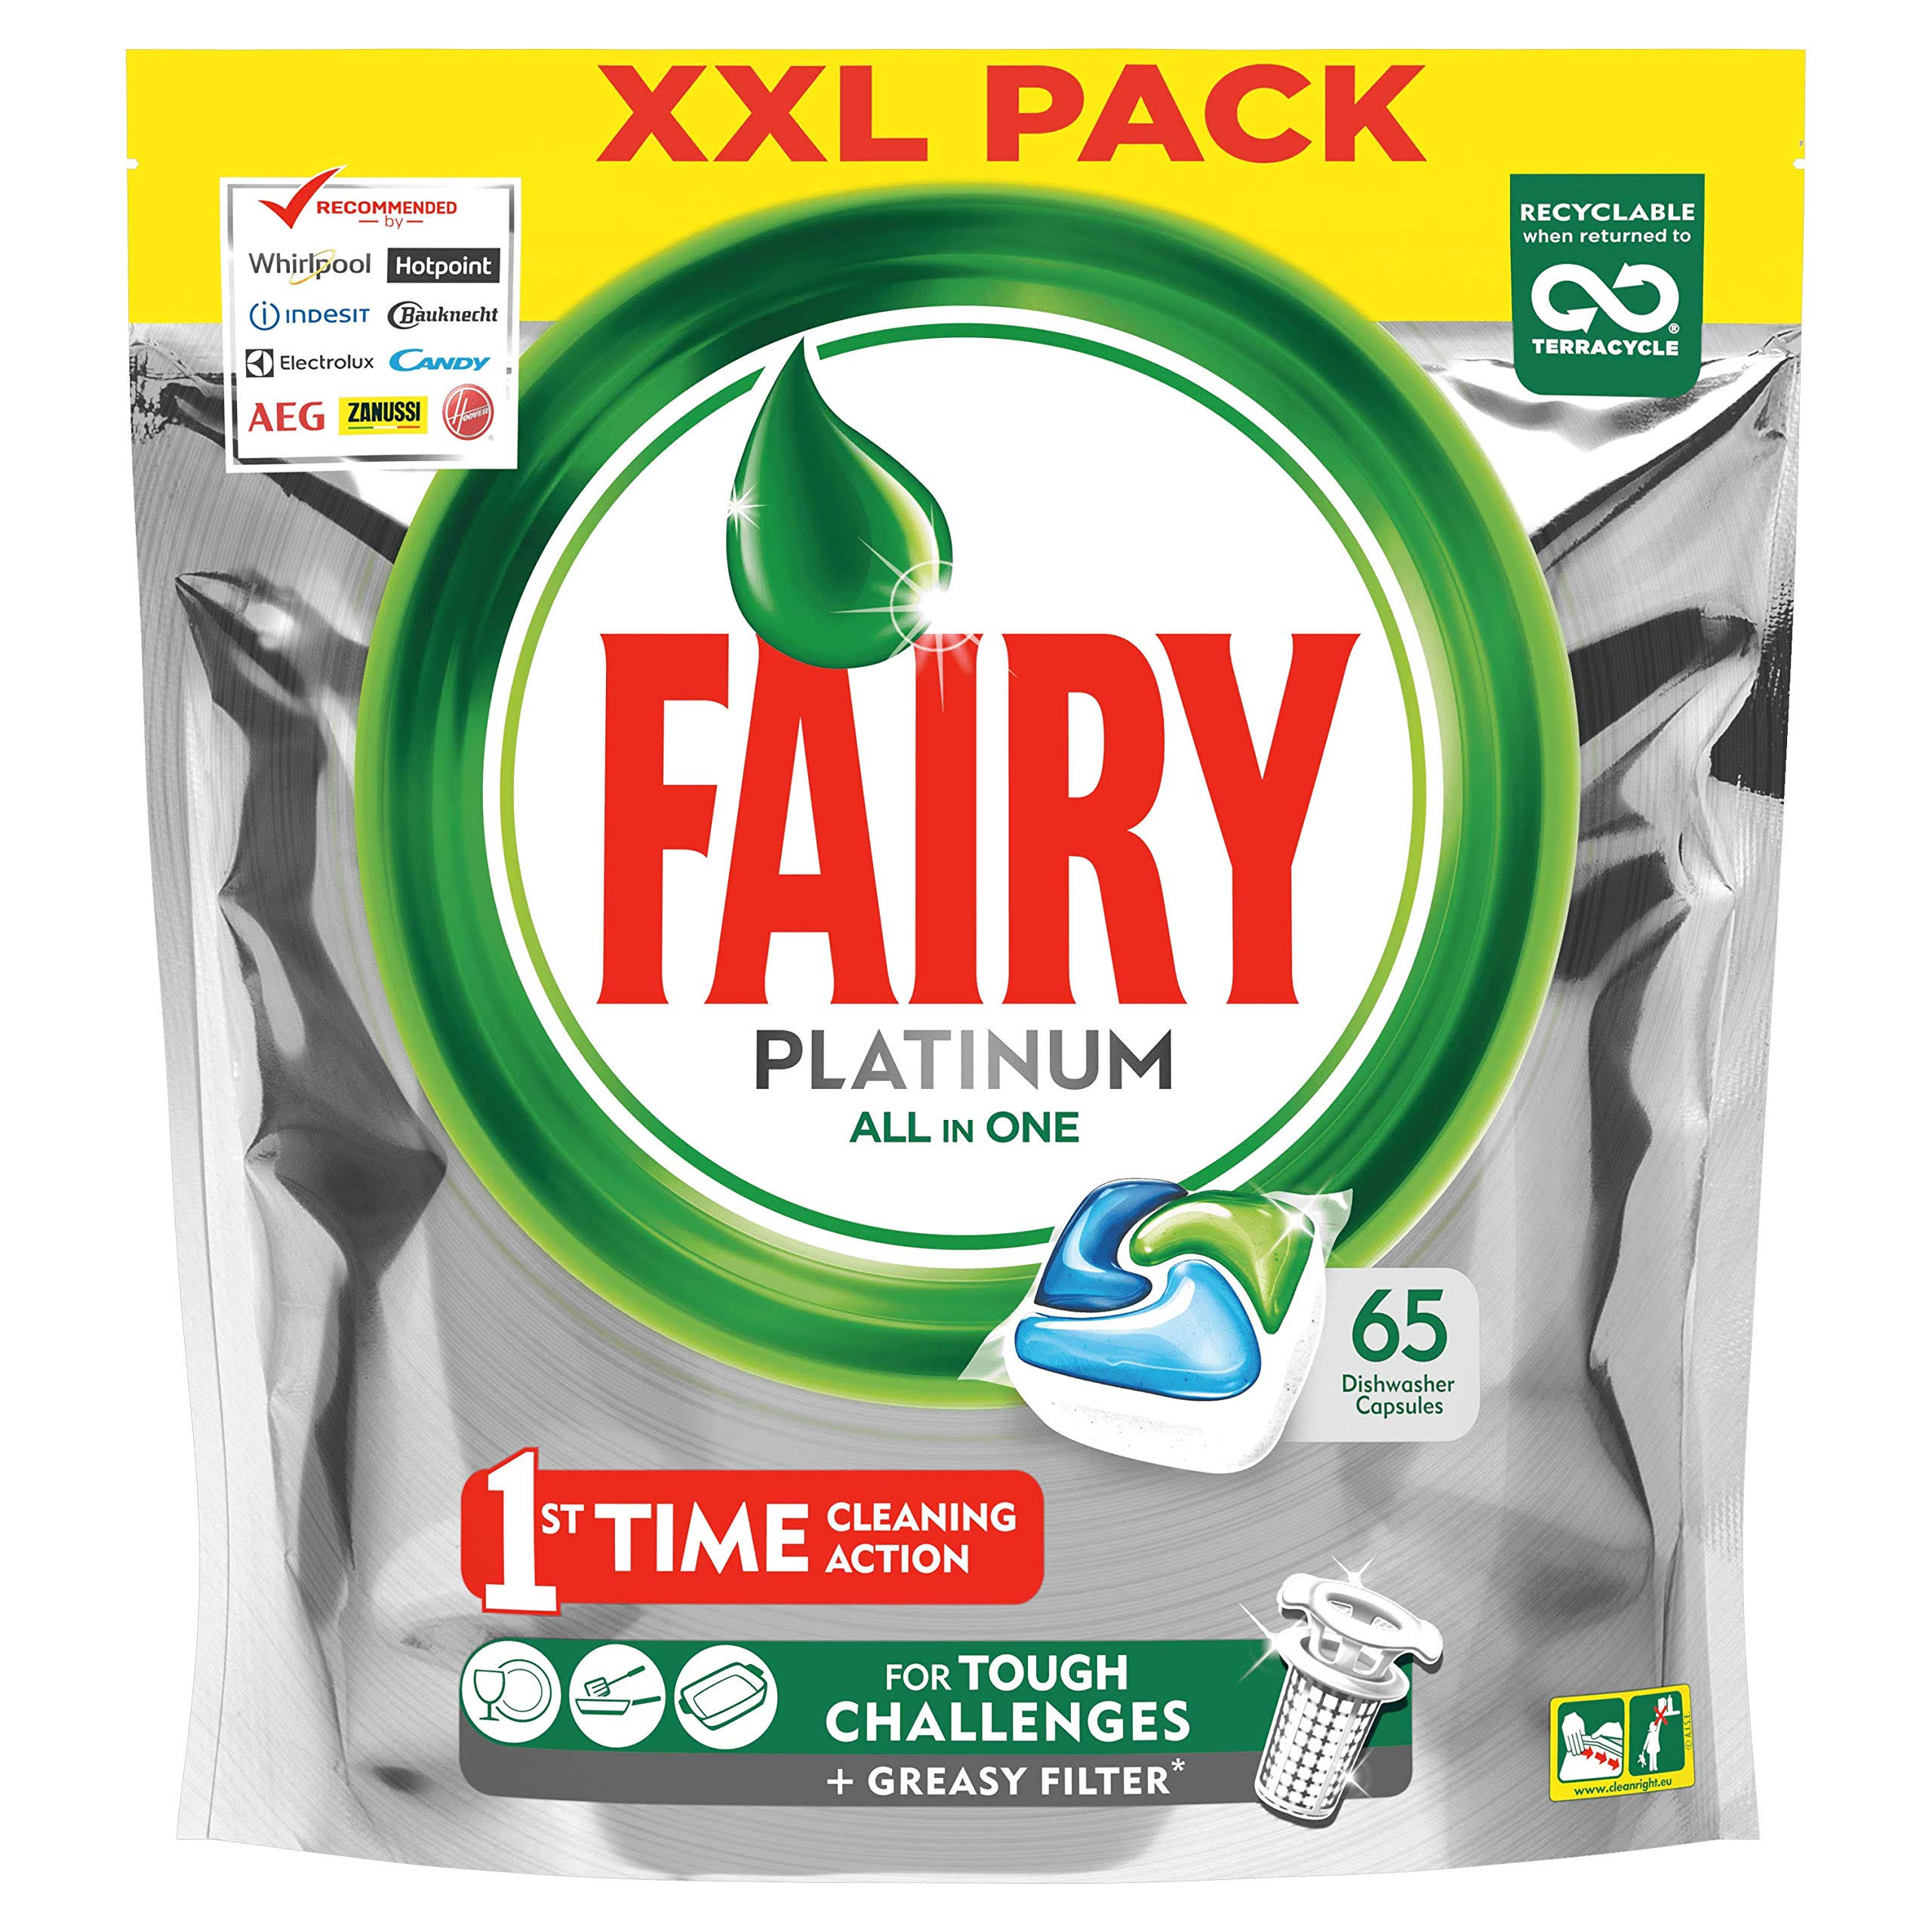 Fairy Platinum Dishwasher Tablets All-in-One Original, 65 Tablets